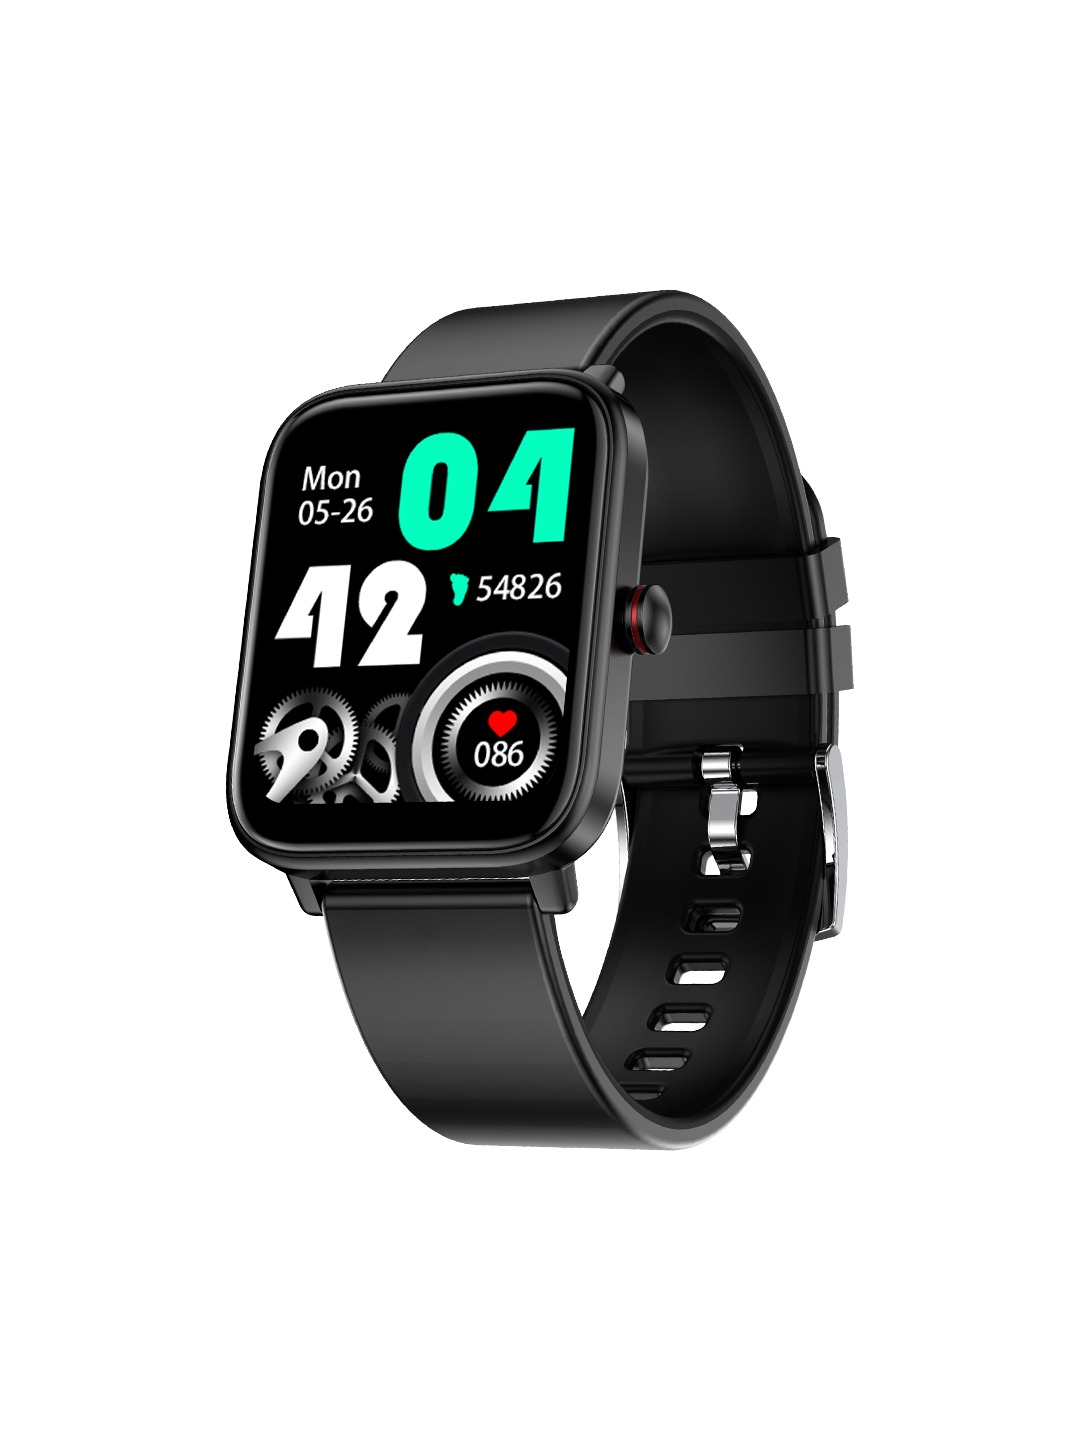 Accessories Smart Watches | Fire-Boltt Ninja Pro Max Smartwatch with 27 Sports Modes (Black) - MY85570